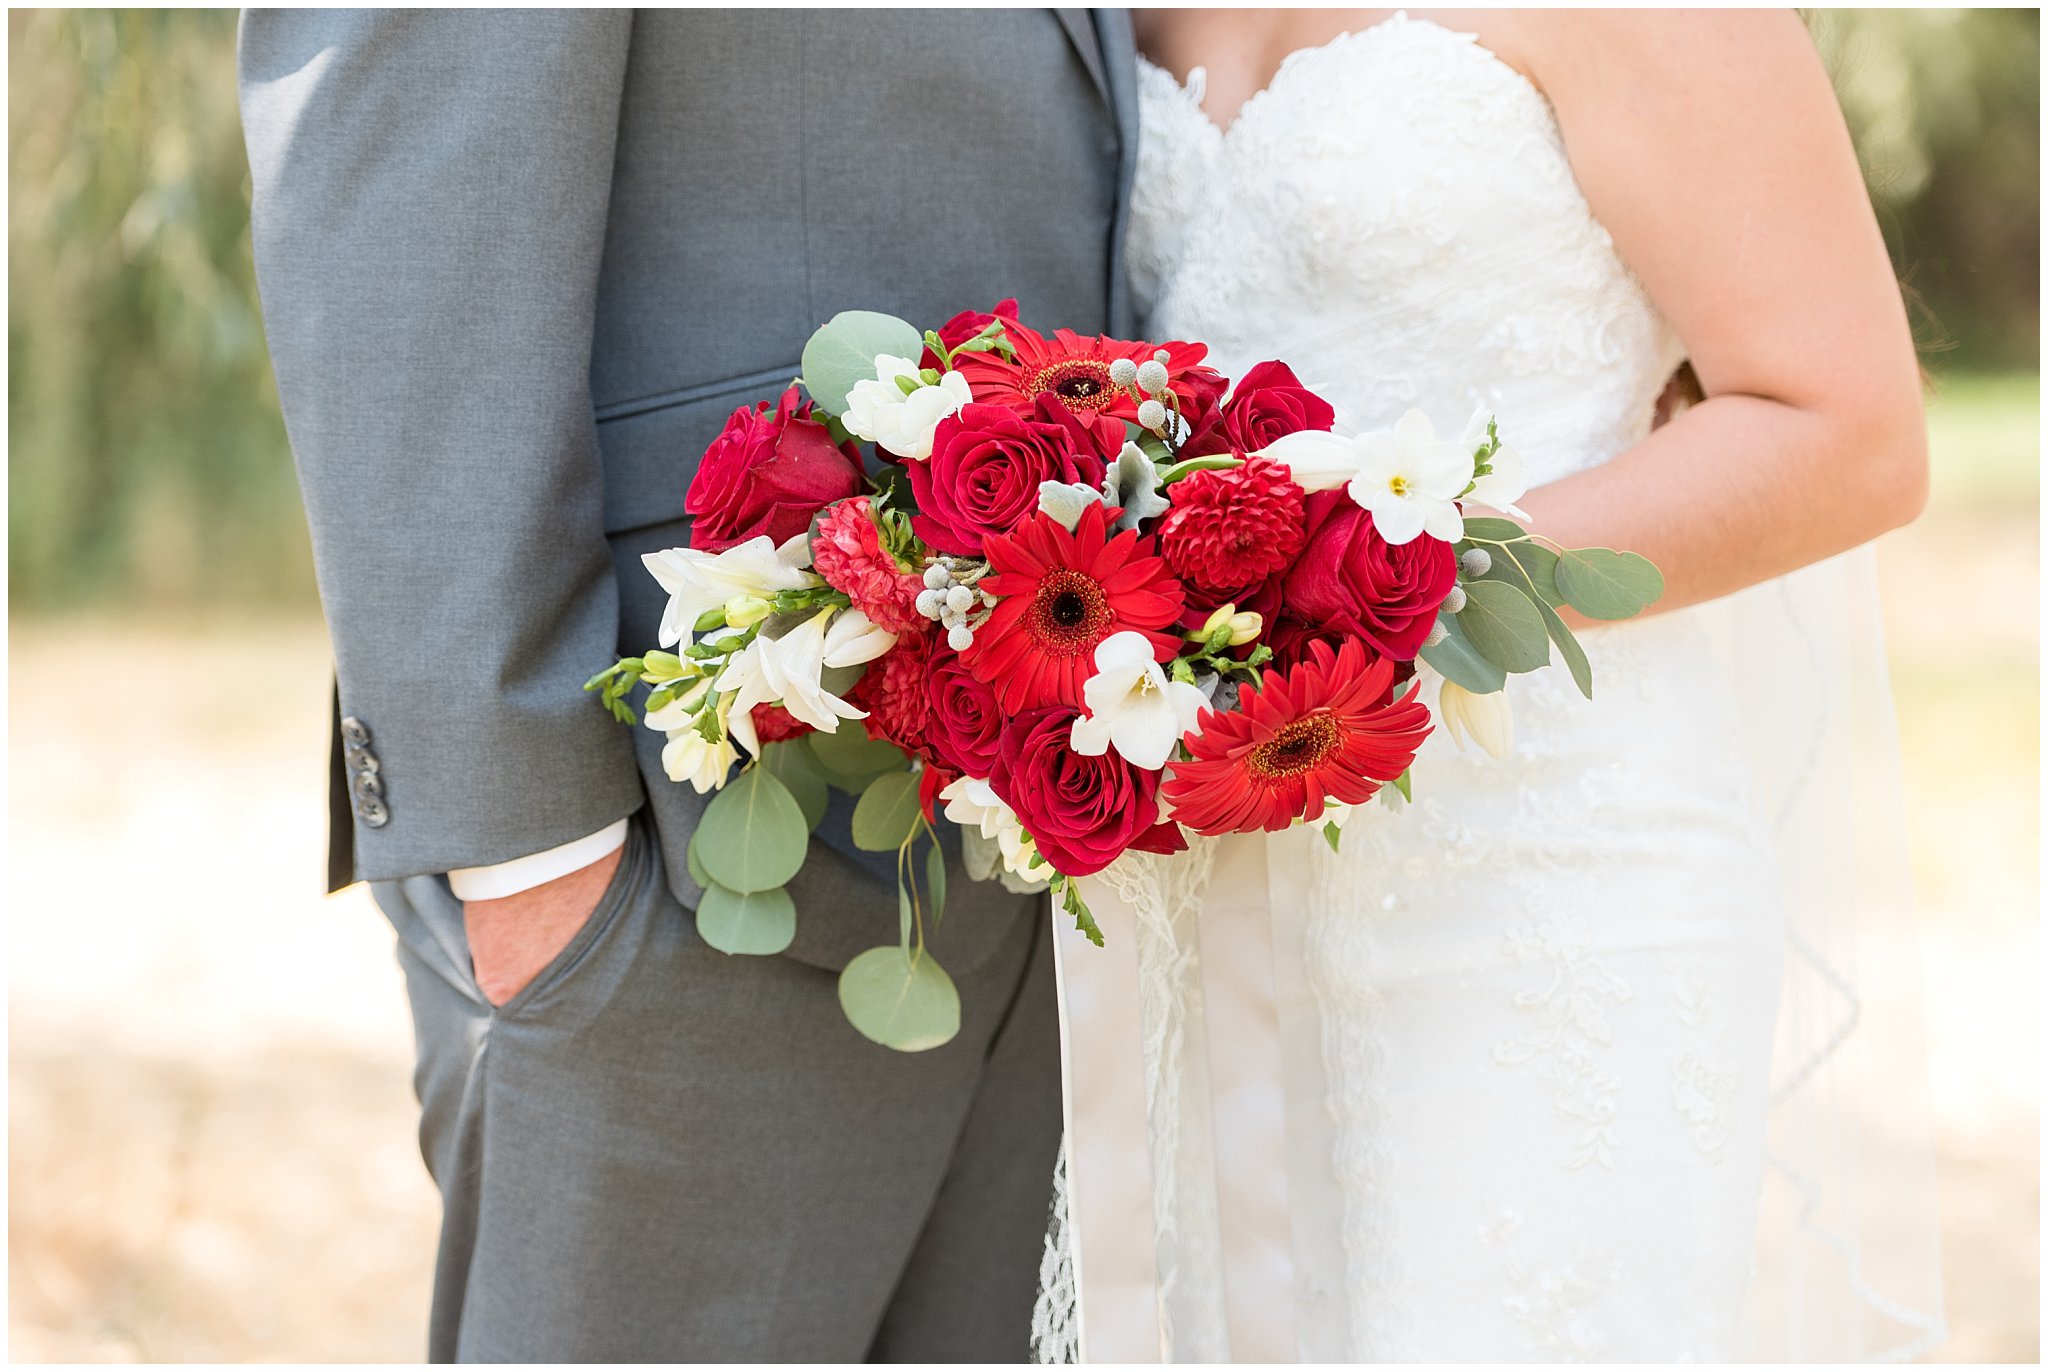 Bride and groom holding red and white bouquet | Davis County Outdoor Wedding | Jessie and Dallin Photography